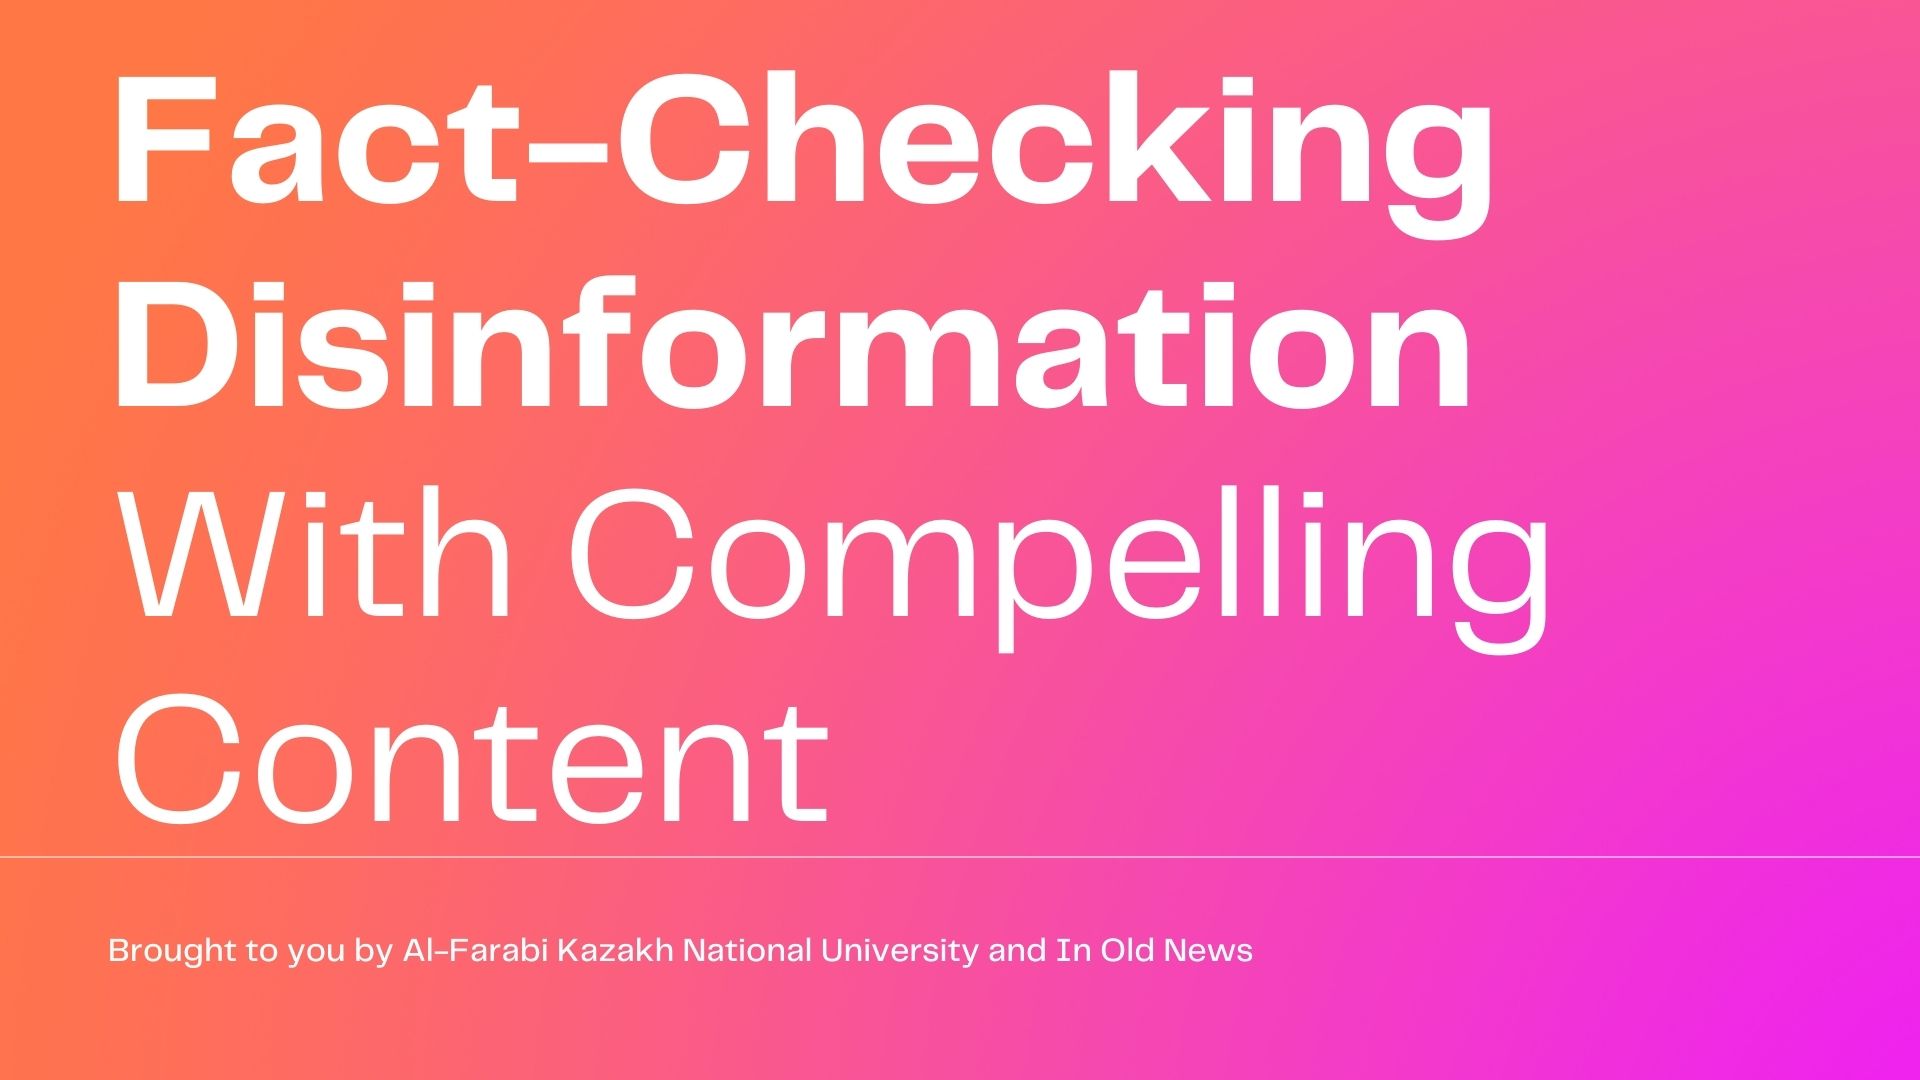 Fact-Checking Disinformation With Compelling Content [English]